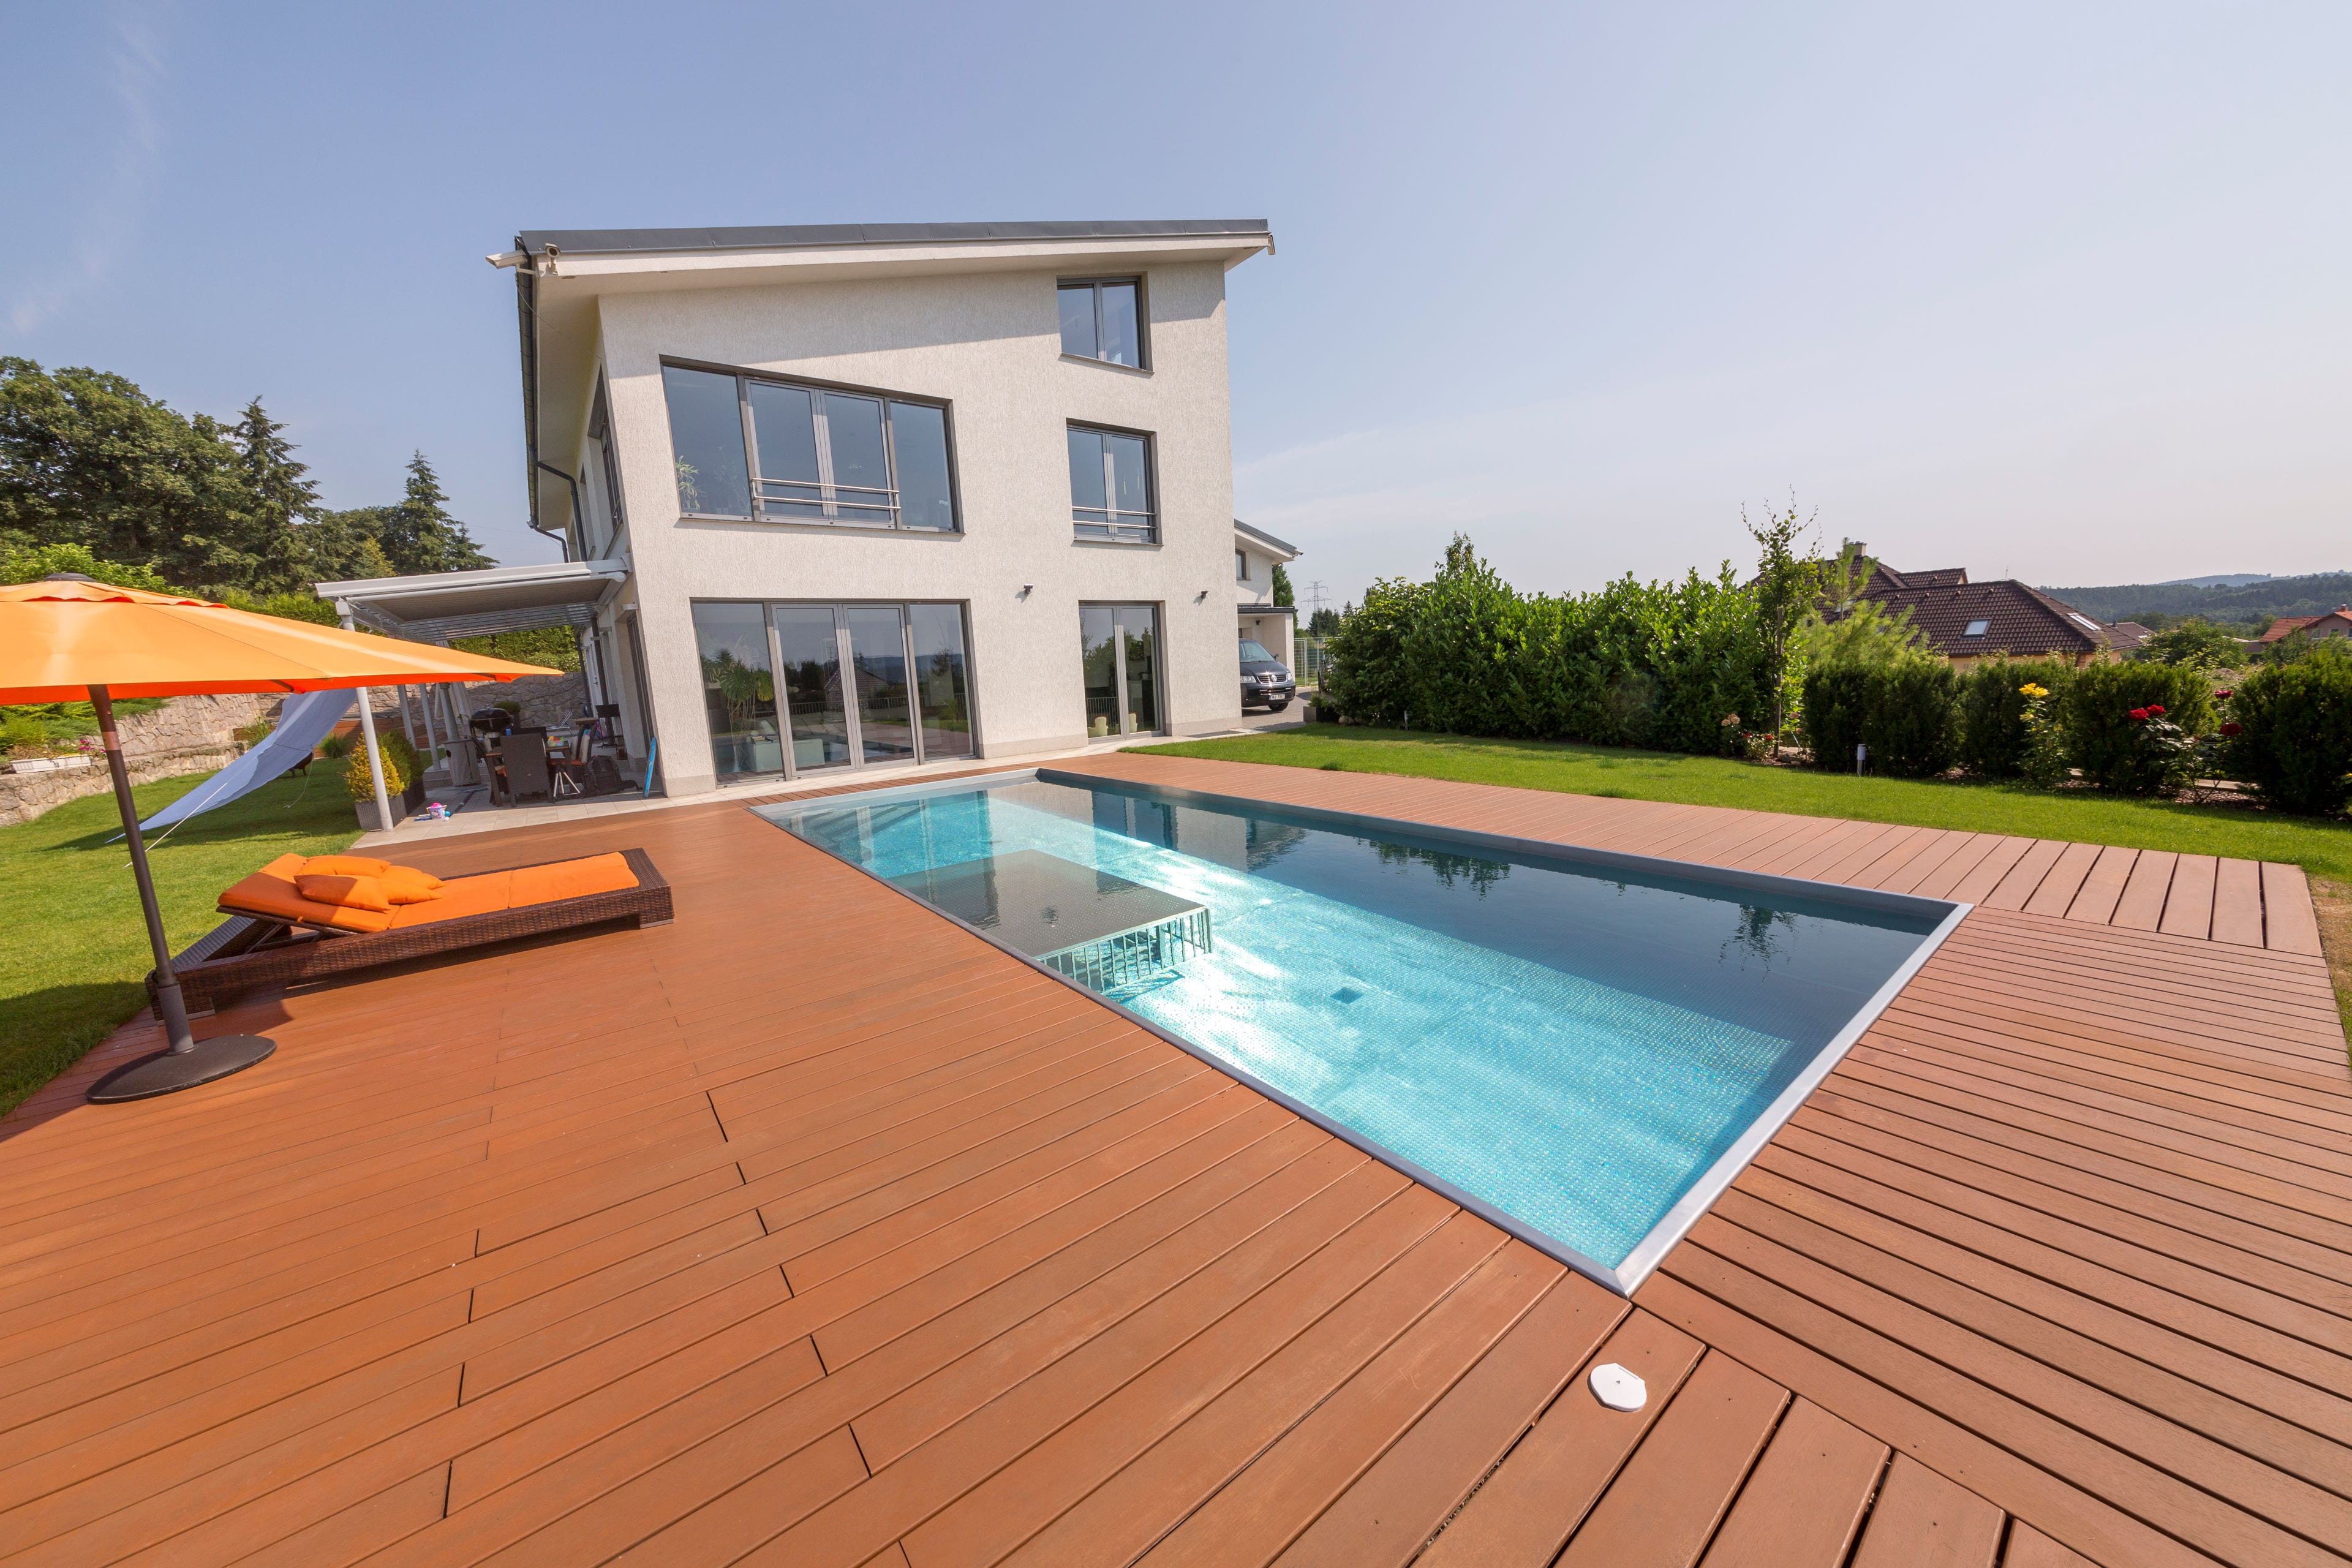 Exterior IMAGINOX Stainless-Steel Pool with paddling pool